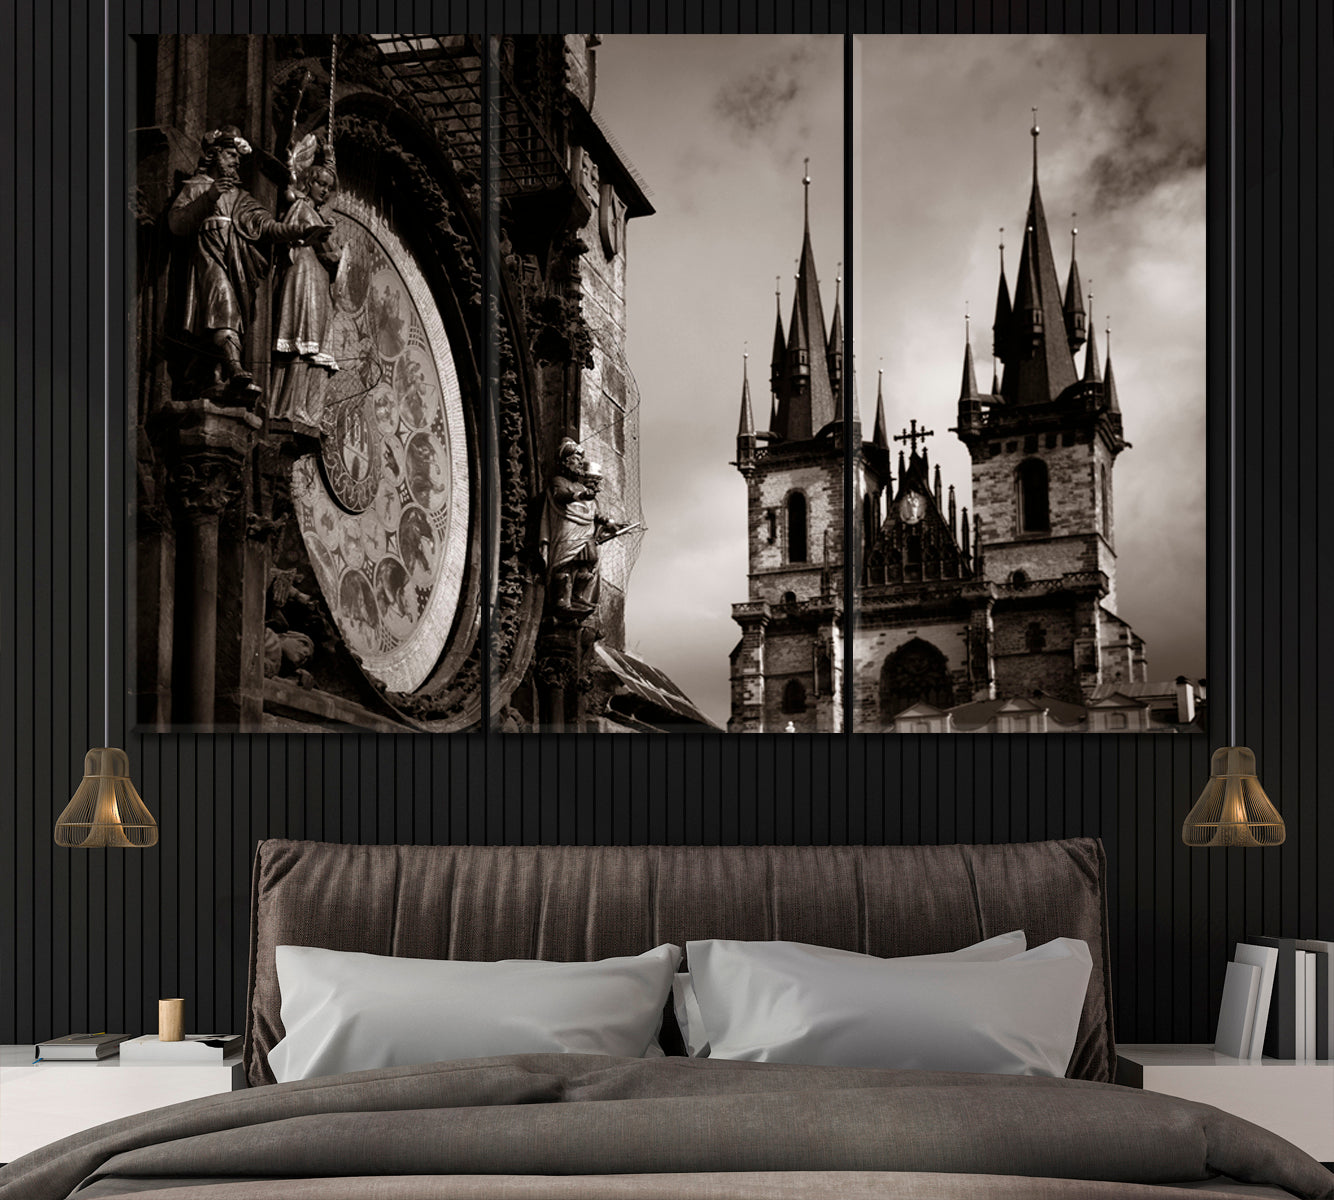 Astronomical Clock Old Town Square Prague Canvas Print ArtLexy 3 Panels 36"x24" inches 